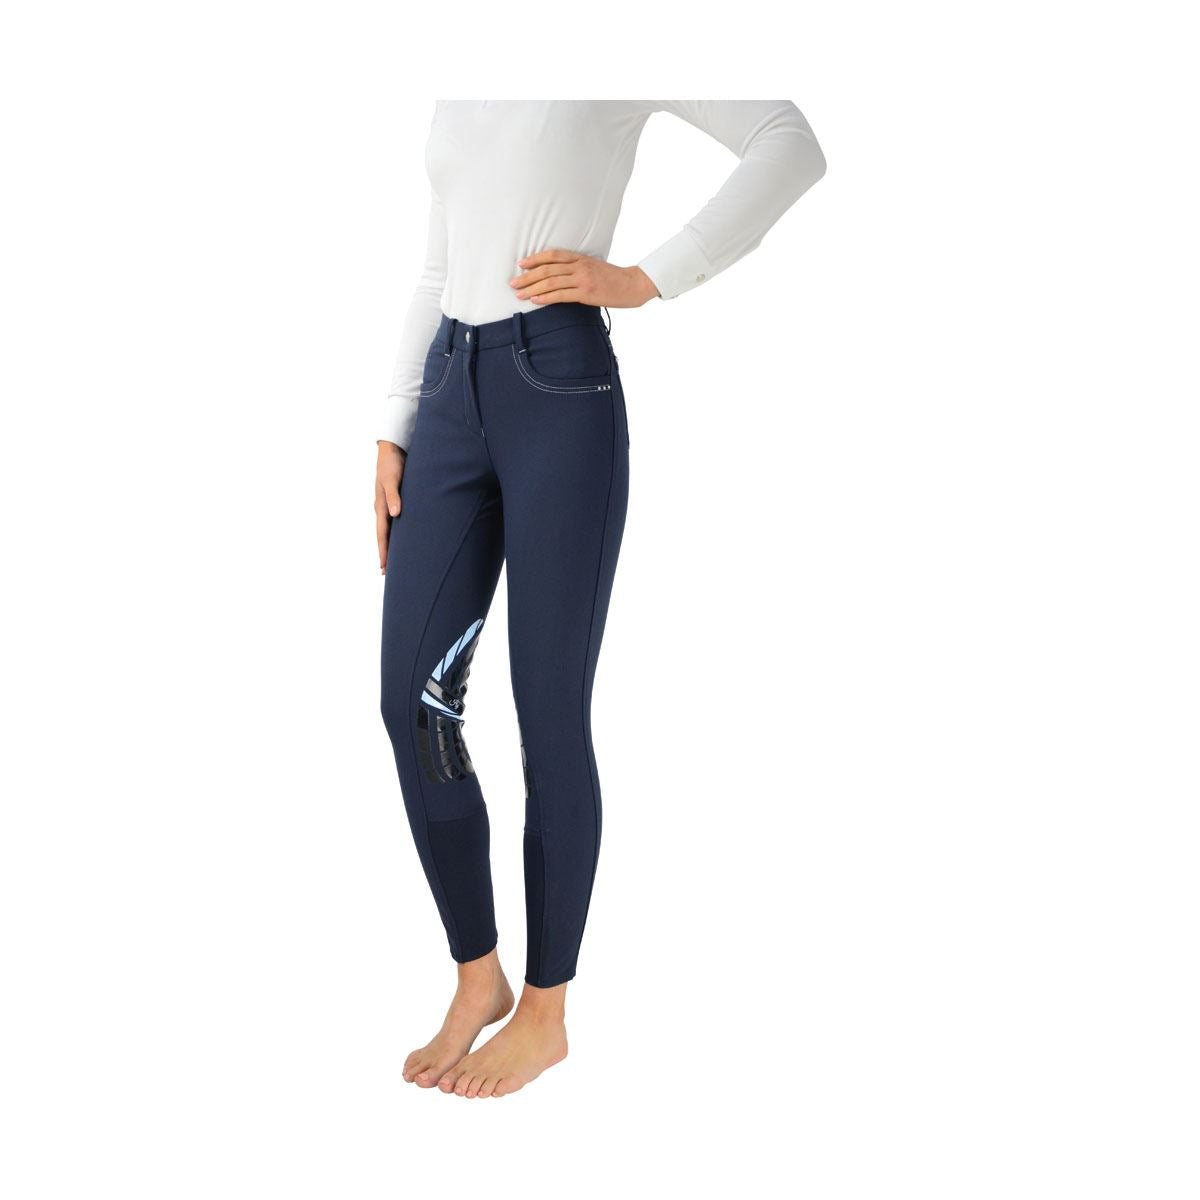 HyPERFORMANCE Corby Cool Ladies Breeches - Just Horse Riders